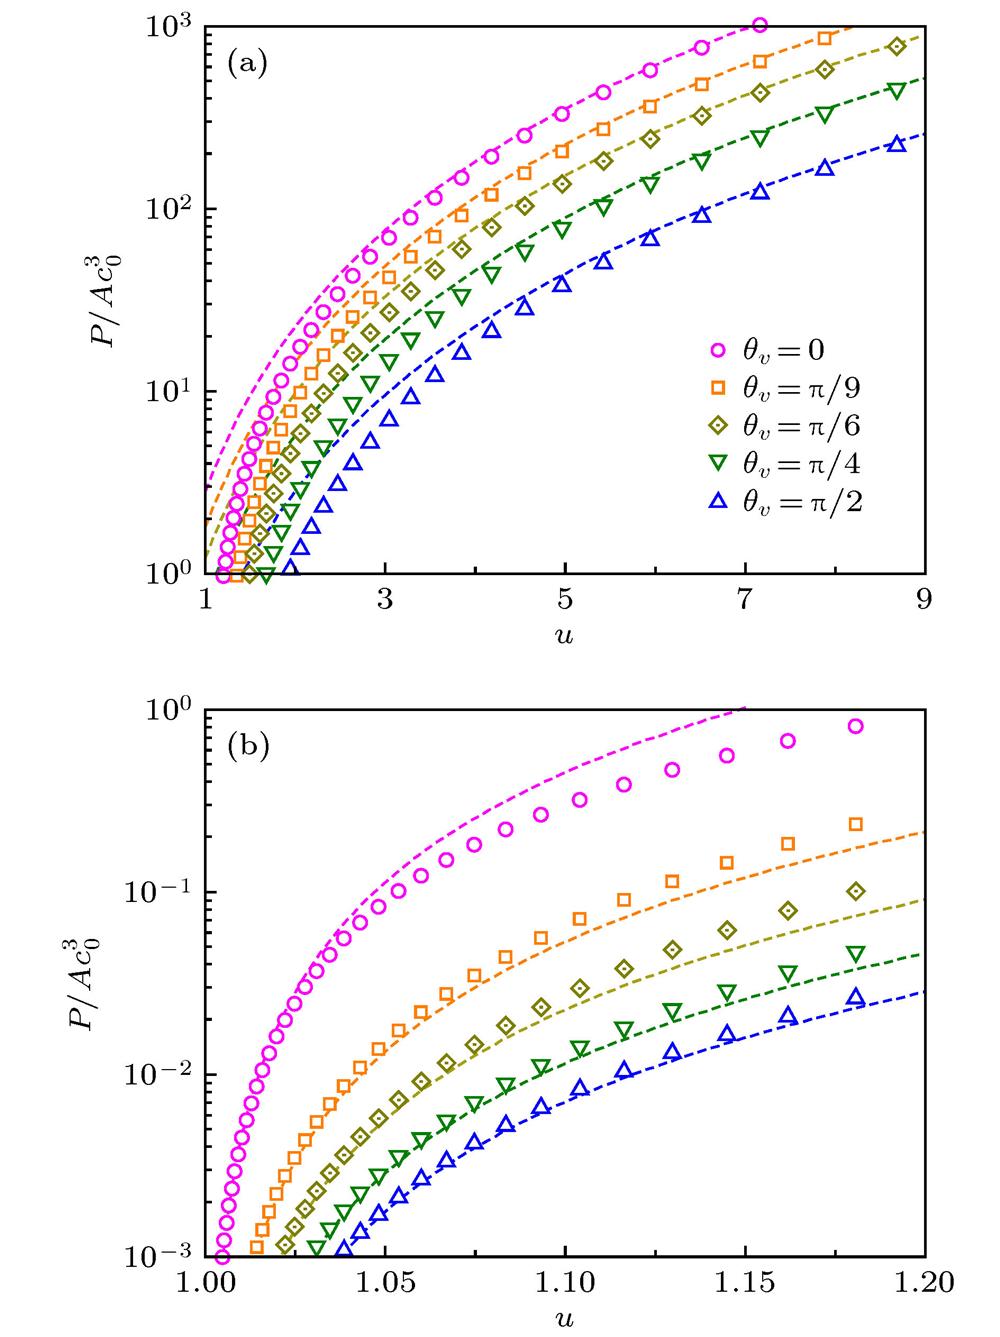 Energy dissipation rate P as a function of reduced velocity u along different directions in (a) high dissipation regime and (b) low dissipation regime. Discrete symbols are numerical results, and dashed lines in (a) and (b) correspond to the asymptotic expressions (8) and (9), respecti-vely. From up to bottom, the critical velocities for each line are given by vc = 1.41c0, 1.21c0, 1.07c0, 0.89c0, and 0.71c0. The two plots use the same legend. The relative strength of dipolar interaction is set as .